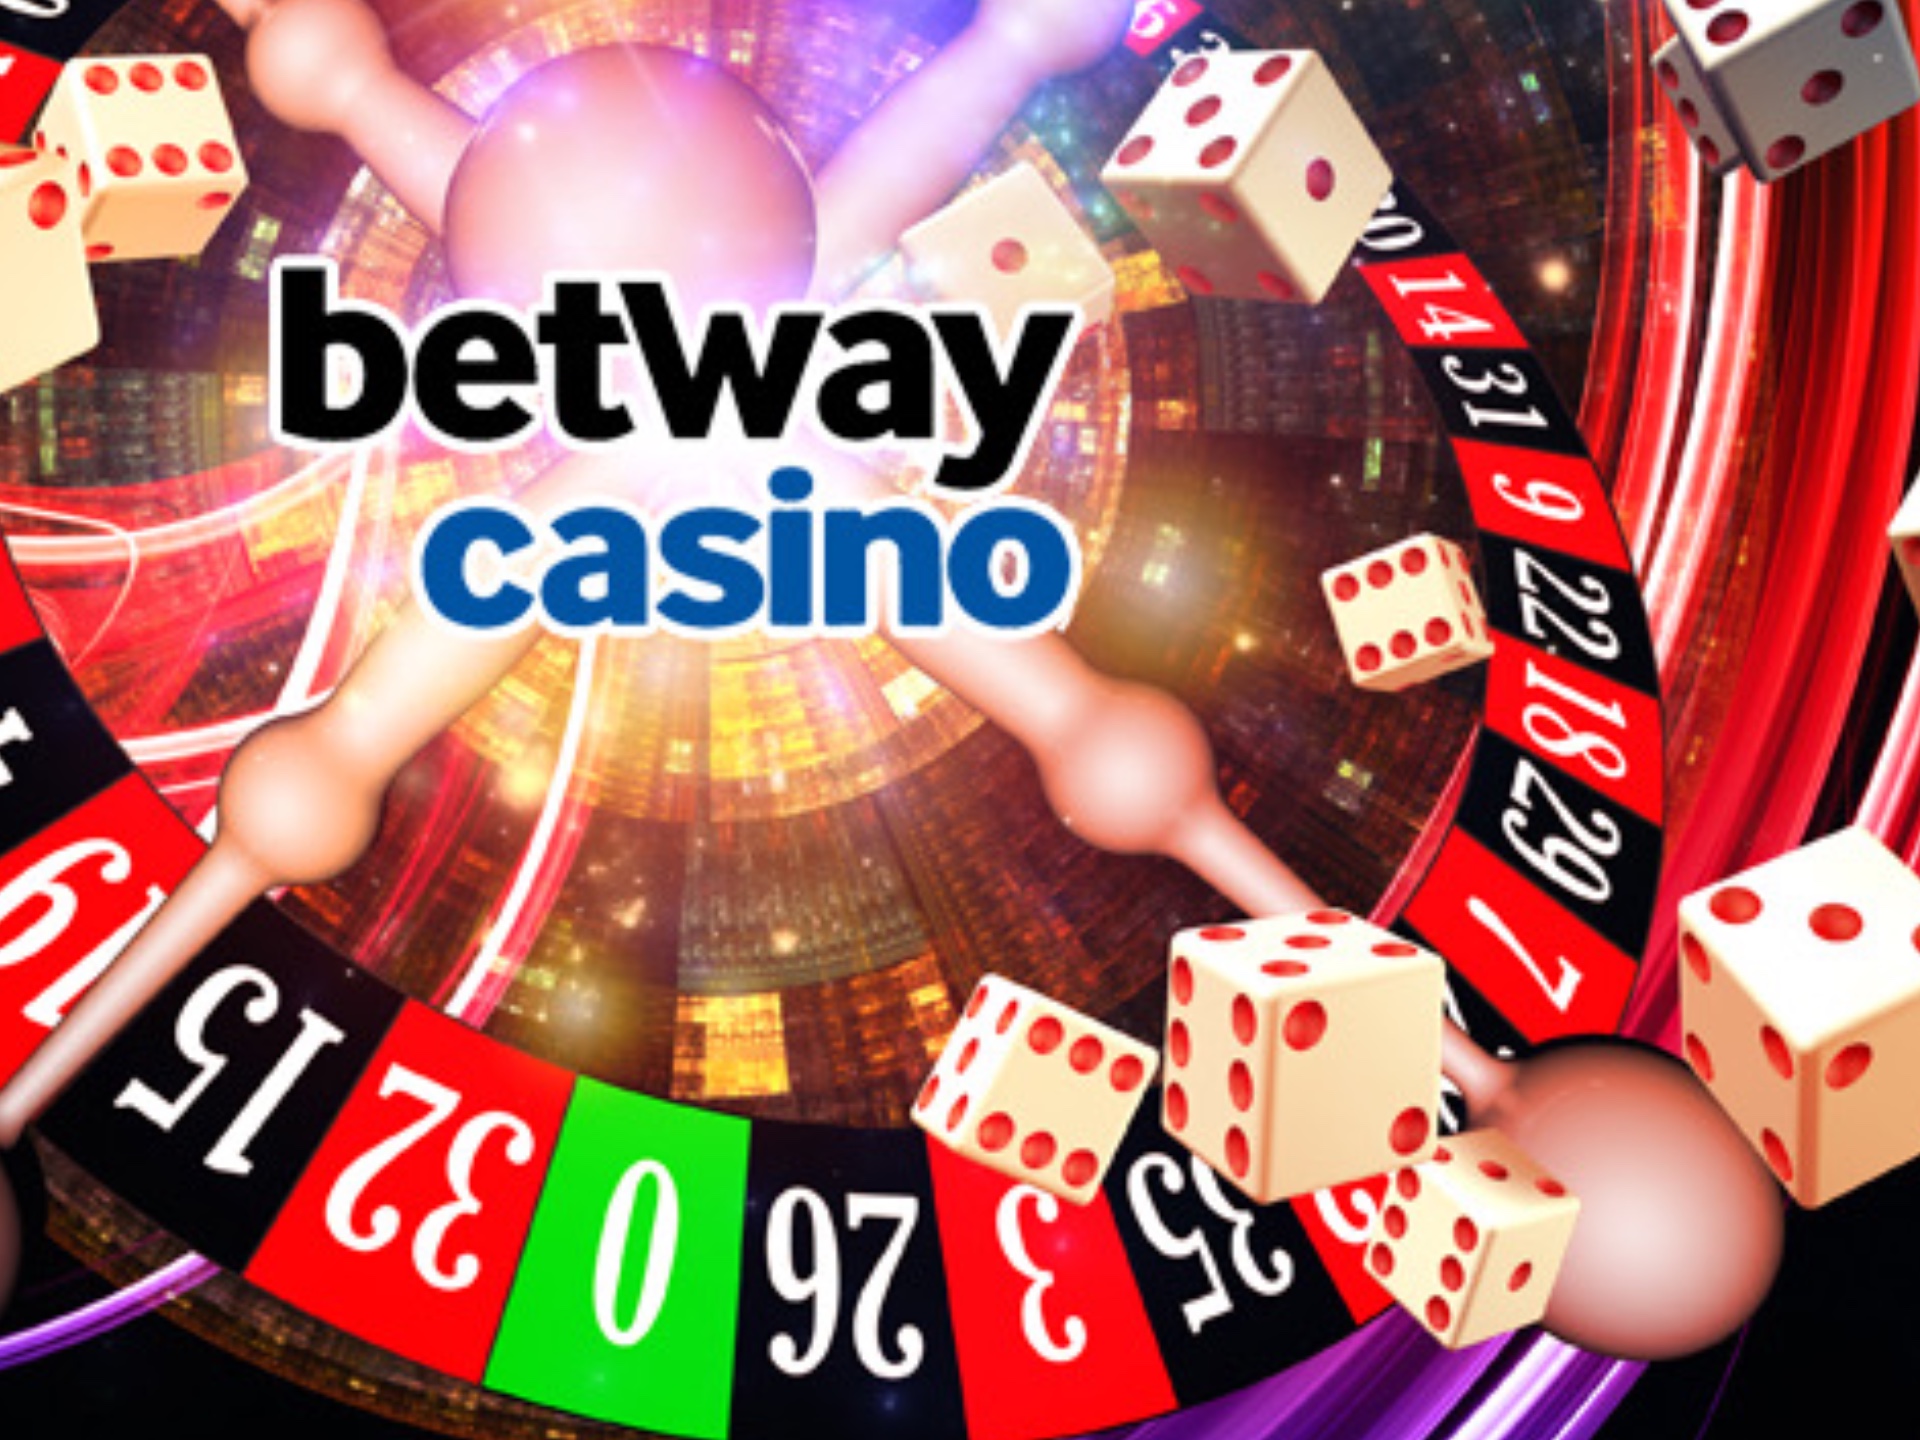 Betway also has probably the best mobile app for online gambling.